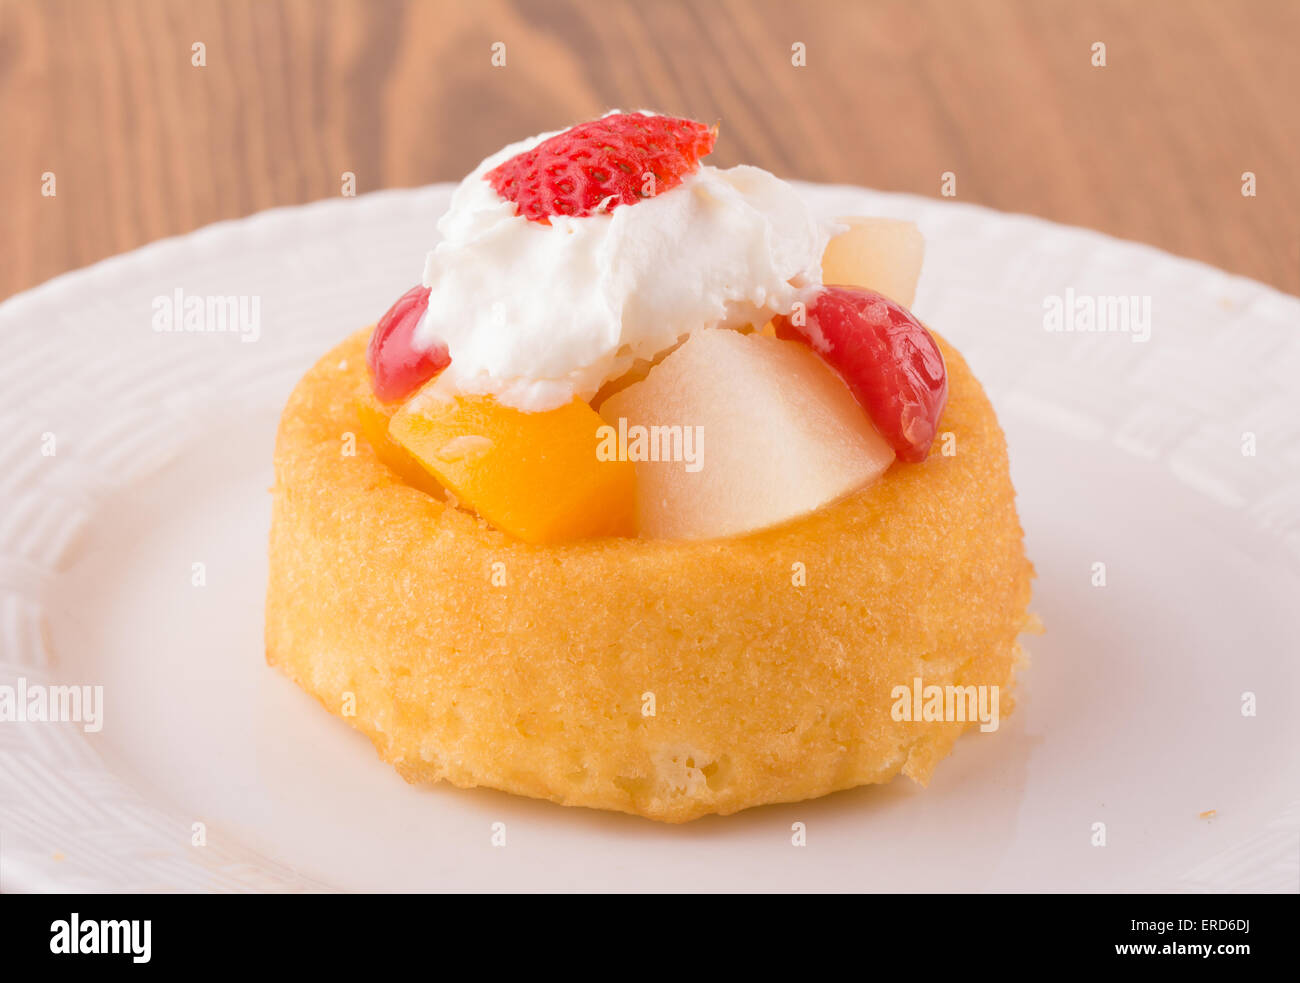 Dessert shell with fruit cocktail and whipped cream topping on a white plate Stock Photo